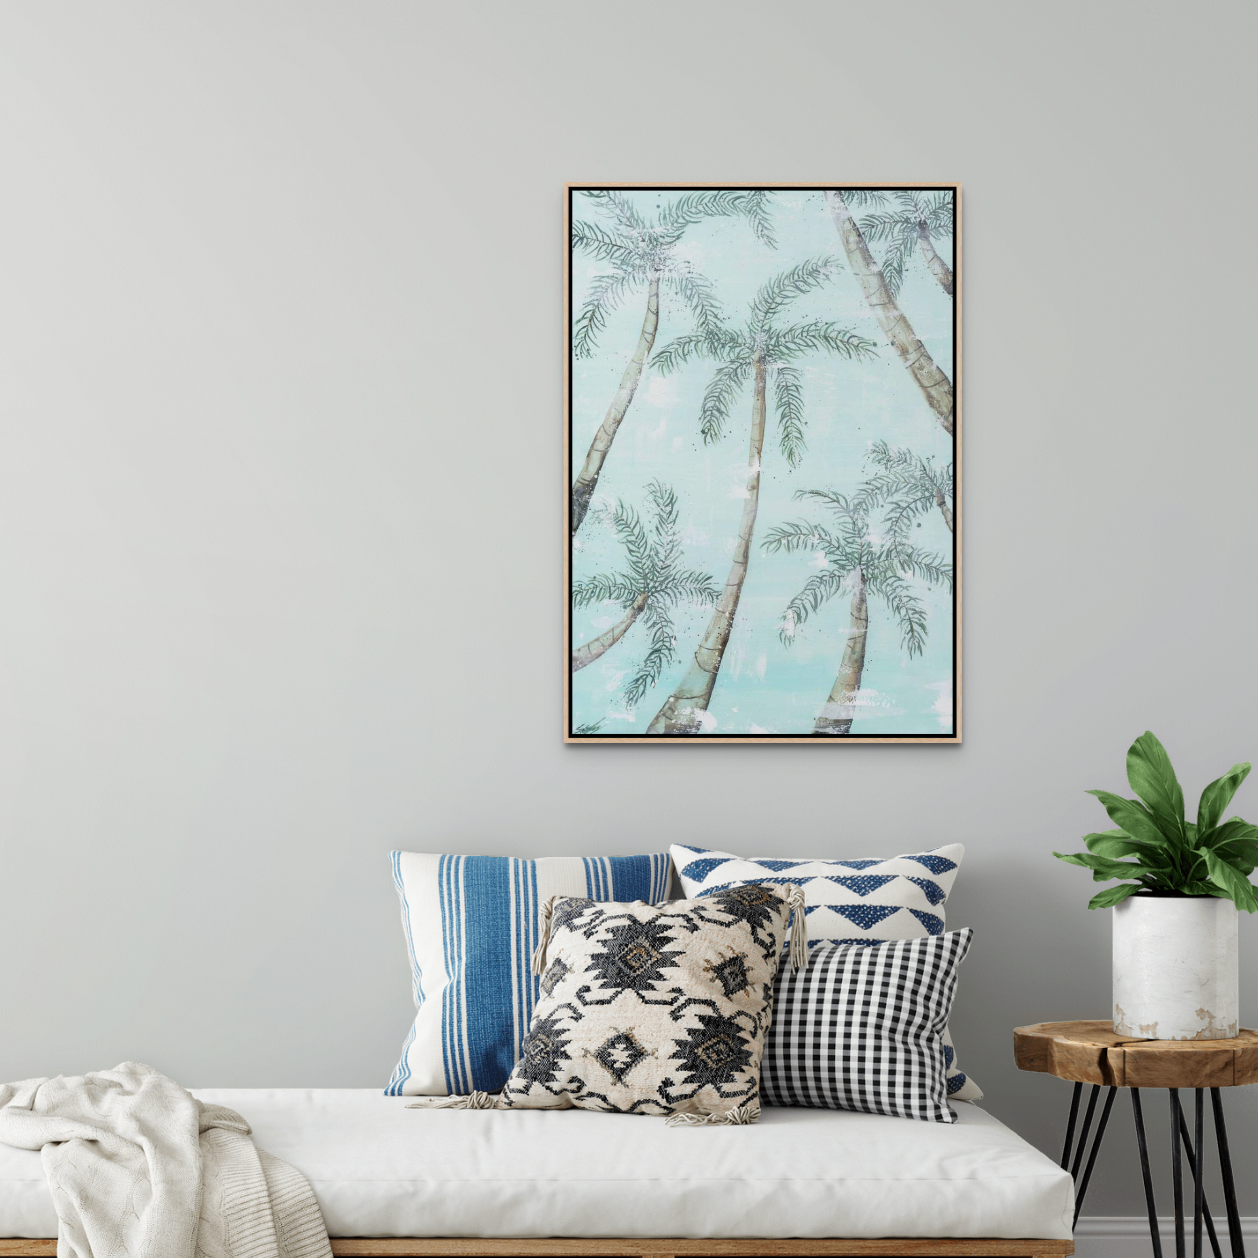 Tropical Palm Trees canvas print framed in oak